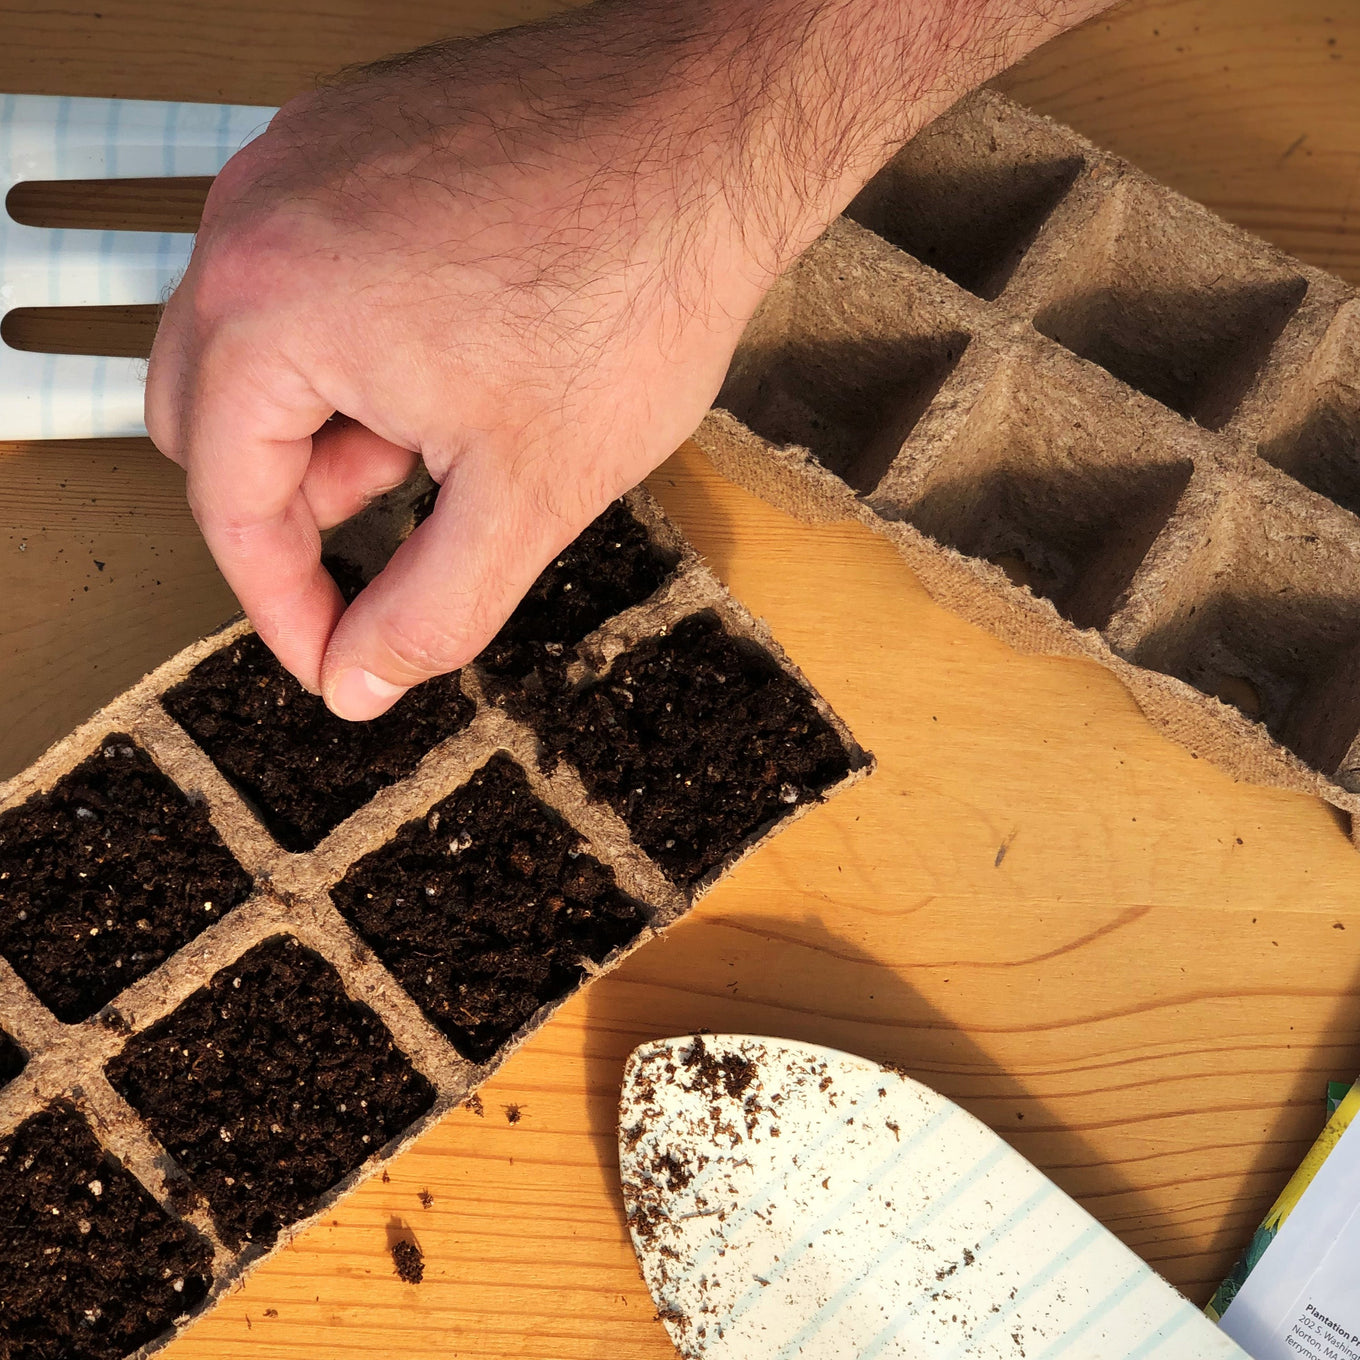 Start Muncher Cucumber seeds in Jiffy peat strip trays filled with Jiffy seed starting mix.